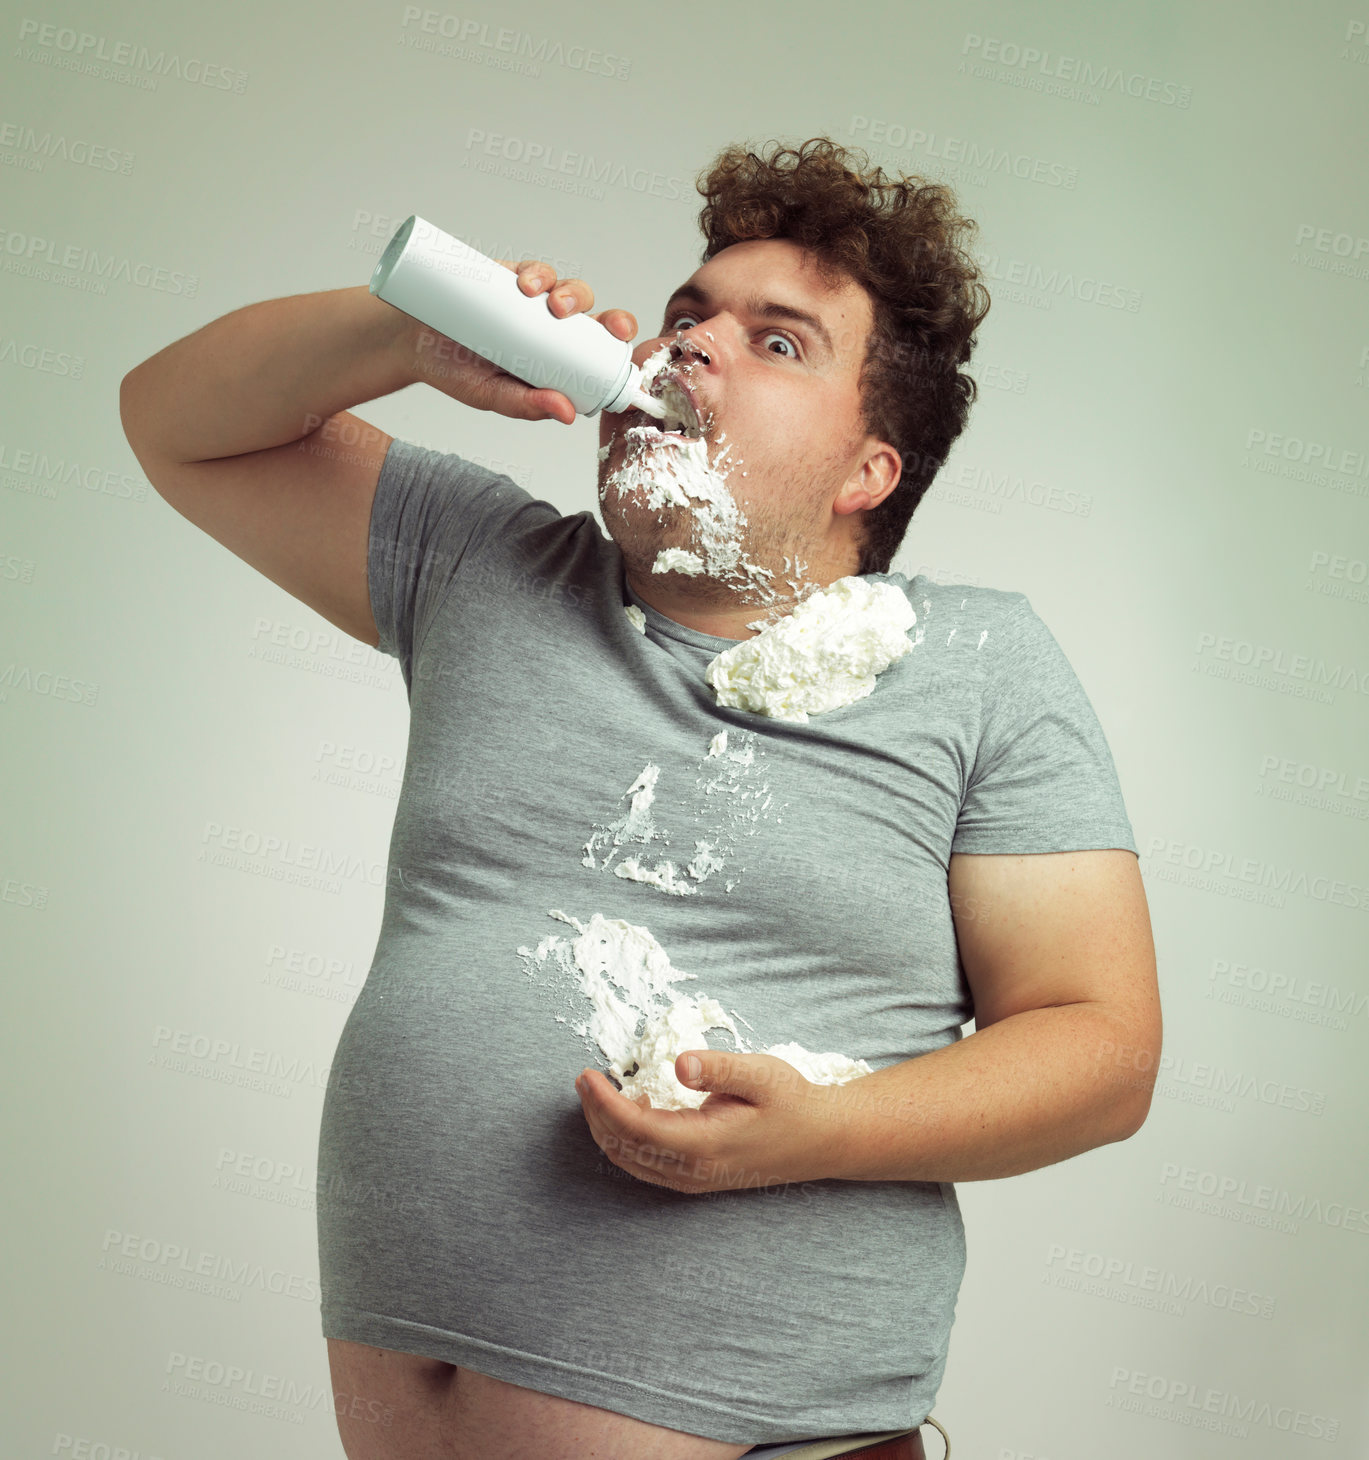 Buy stock photo Shot of an overweight man filling his mouth with whipped cream